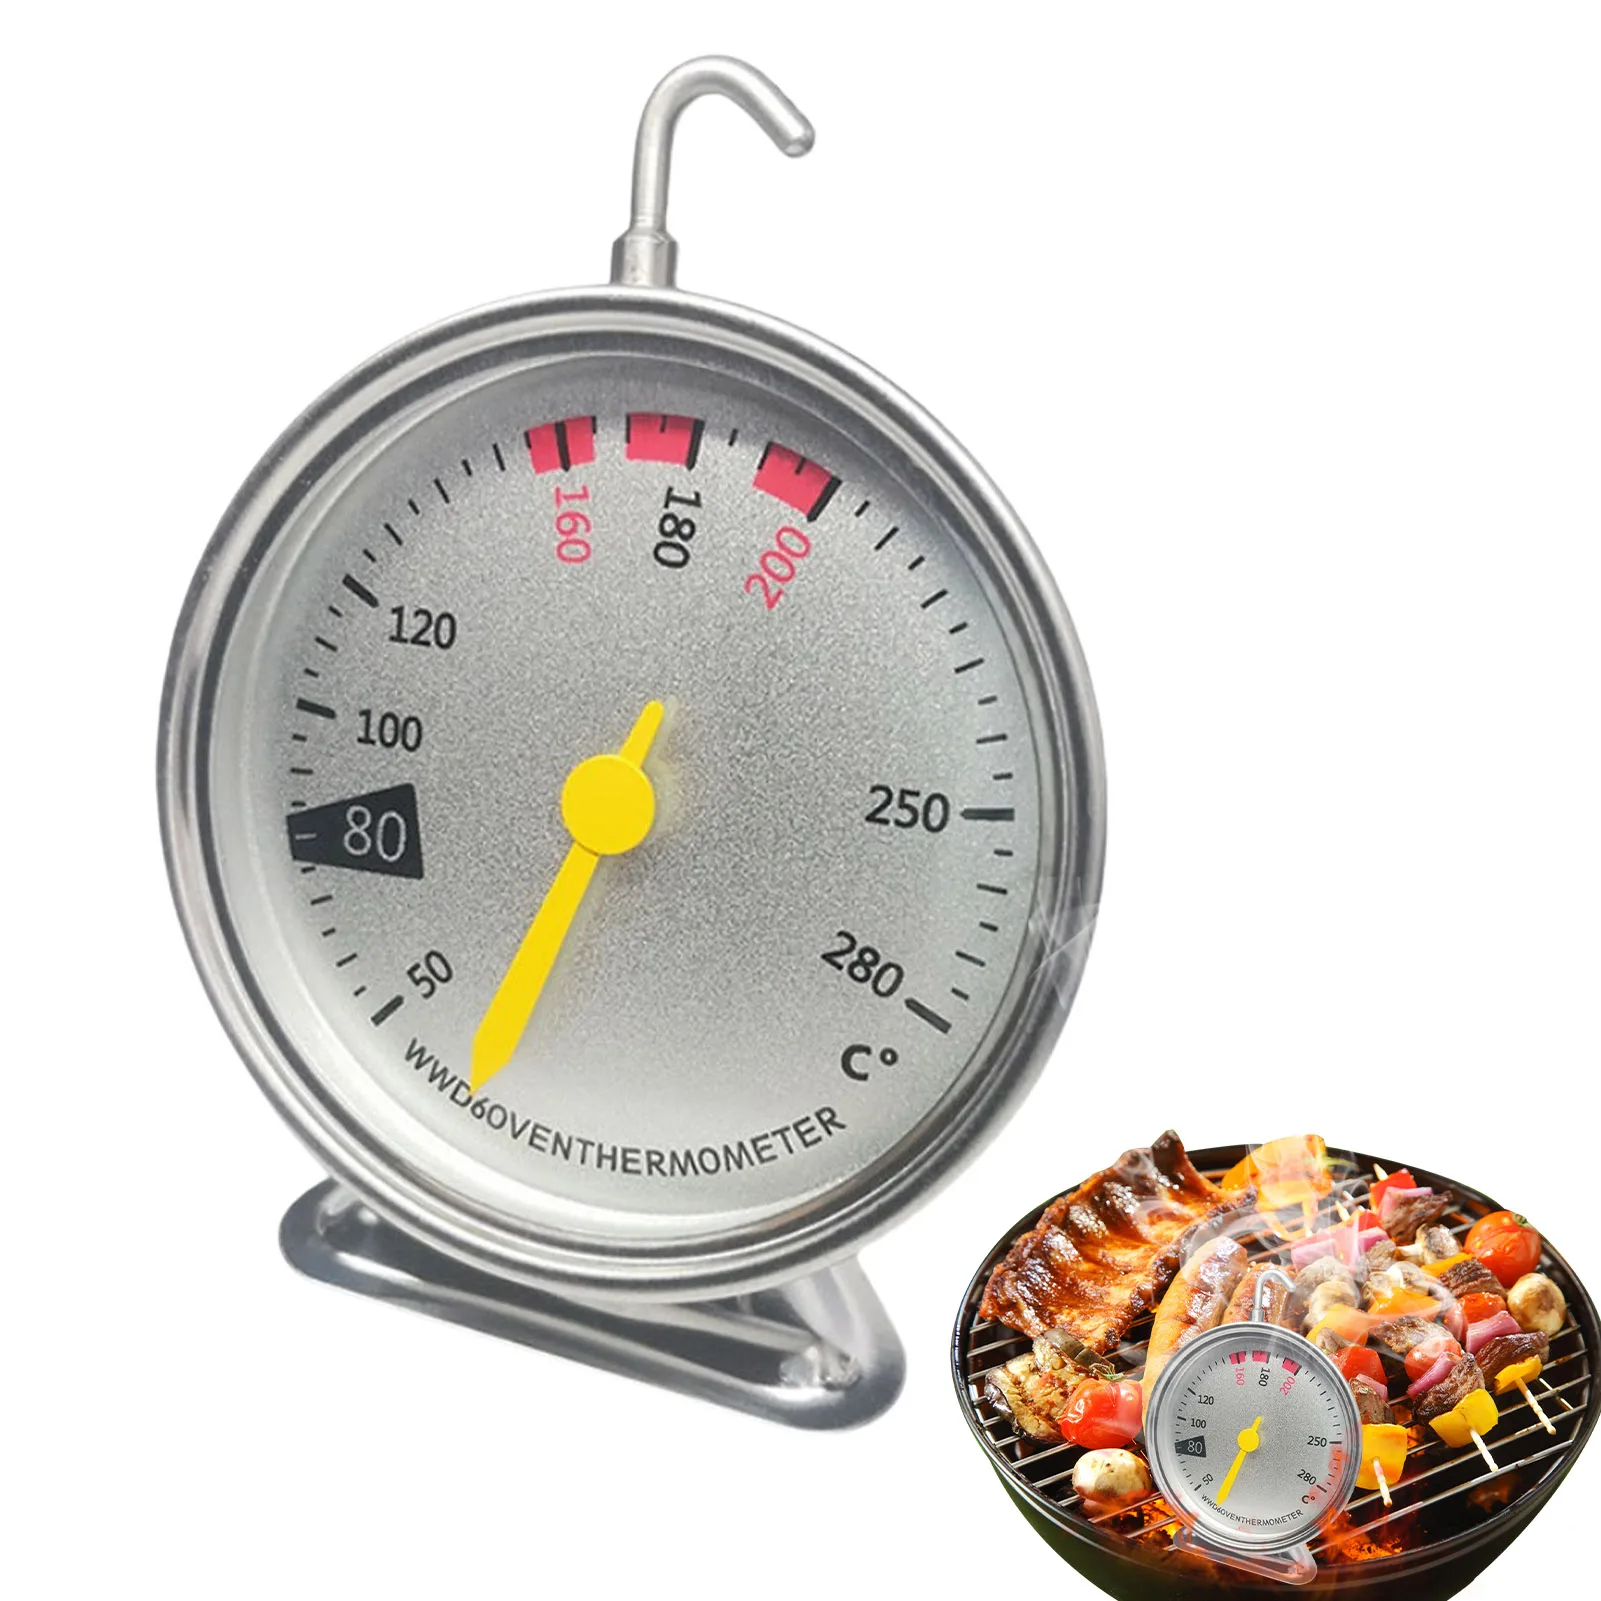 

Oven Temperature Gauge 50-280C/100-536F Oven Baking Chef Thermometer Stainless Steel Oven Temperature Gauge Instant Read And